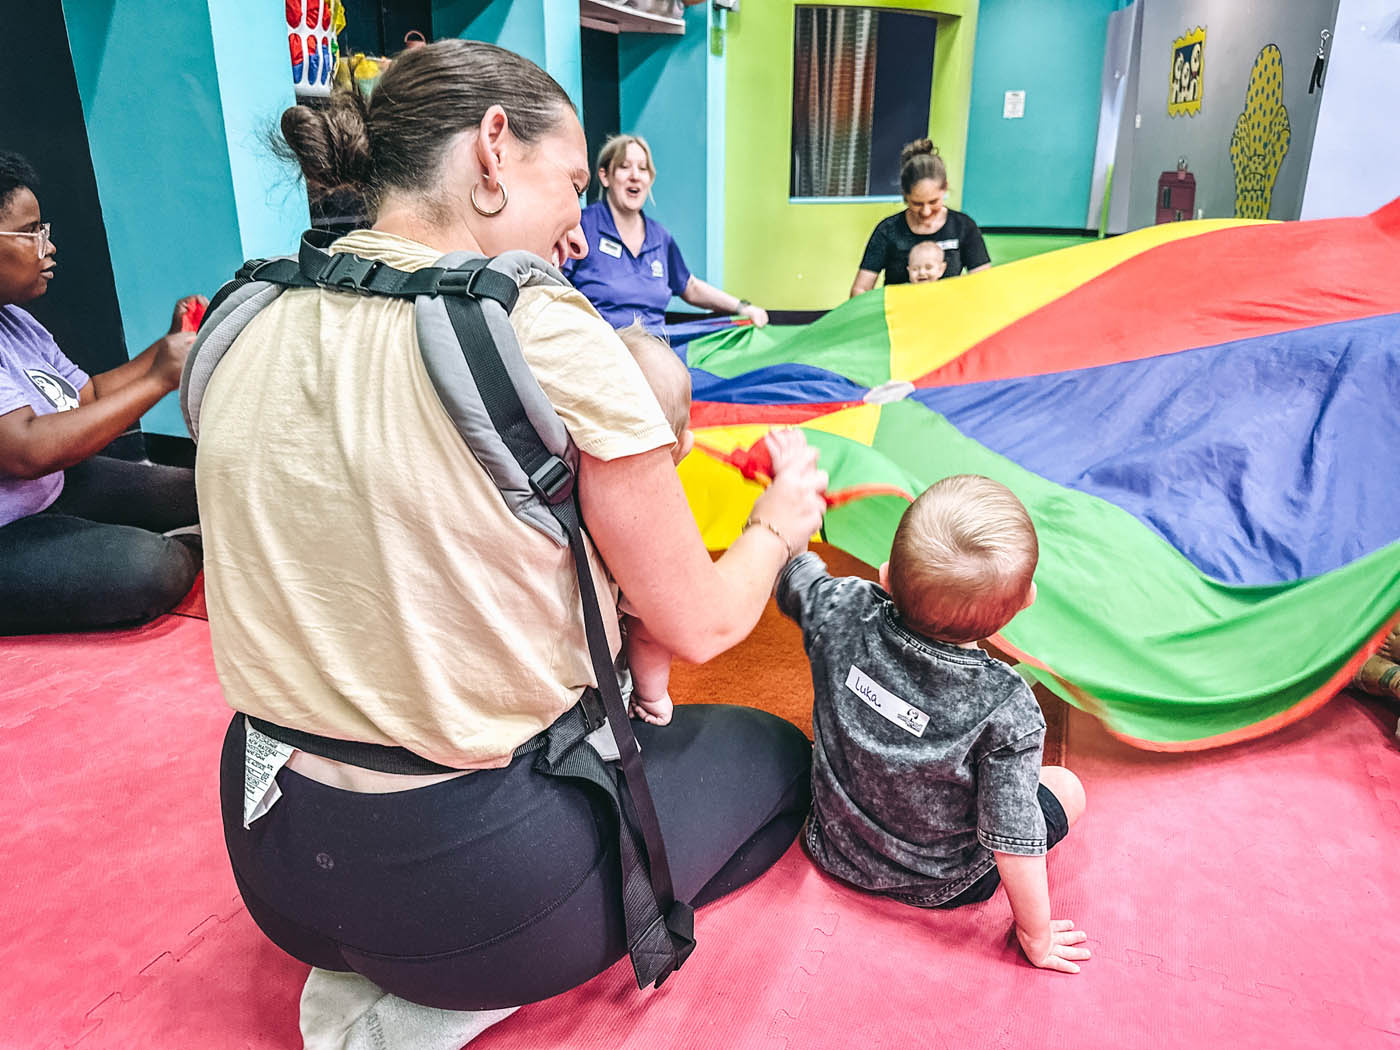 A group of small children with an instructor learning and playing together in a socialization class for kids in Midlothian, VA.